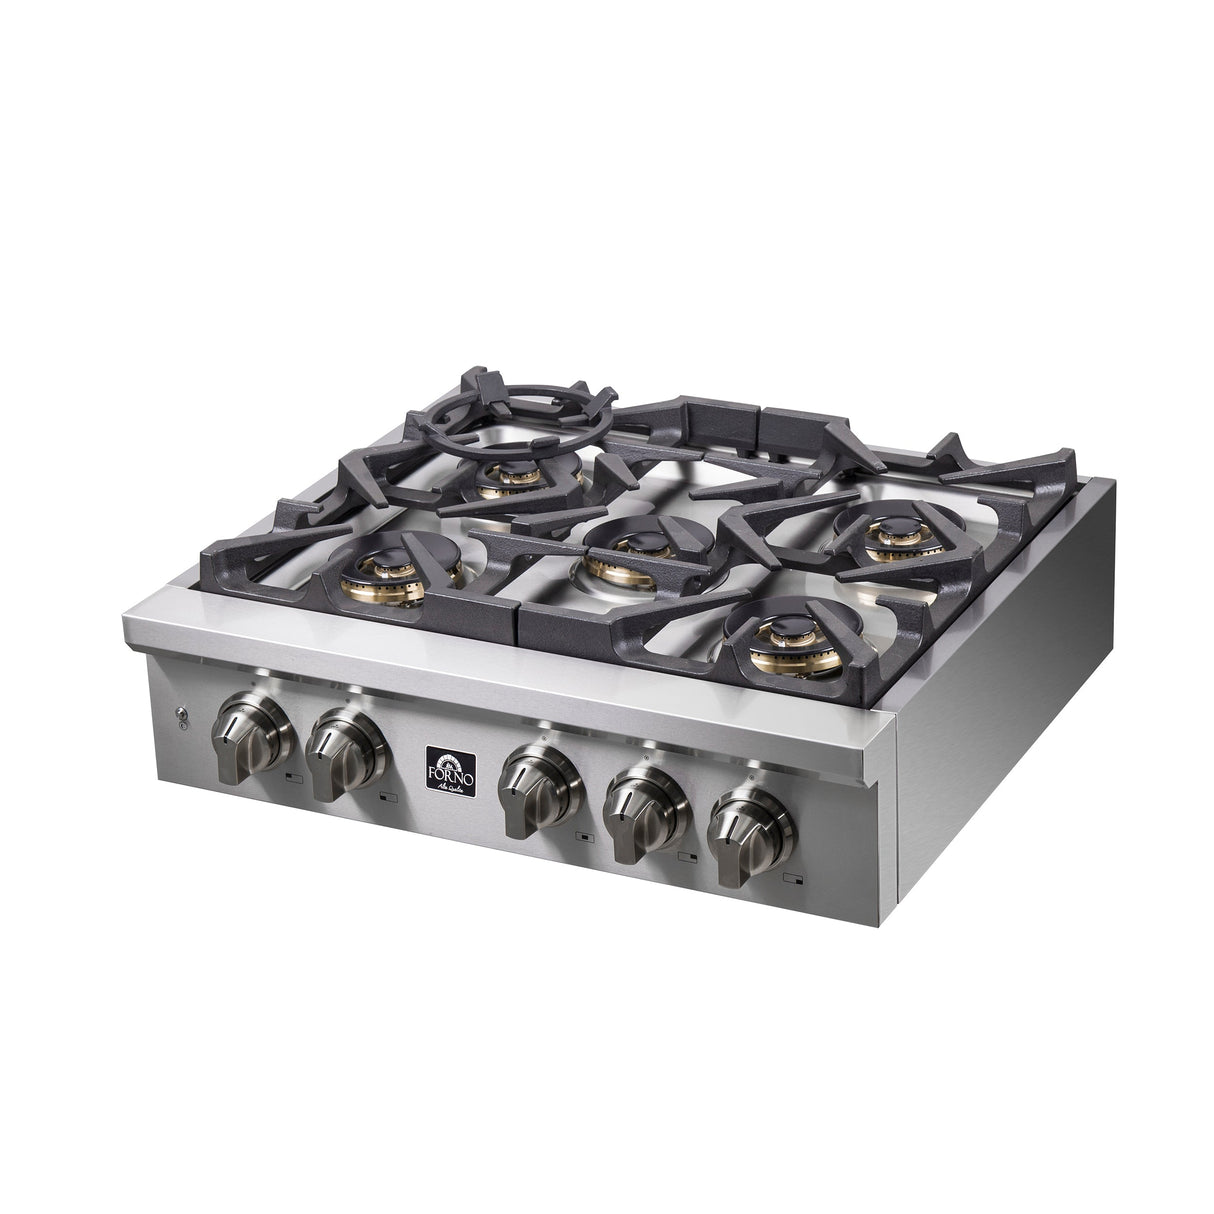 Forno Spezia 30-Inch Gas Rangetop, 5 Burners, Wok Ring and Grill/Griddle in Stainless Steel (FCTGS5751-30)